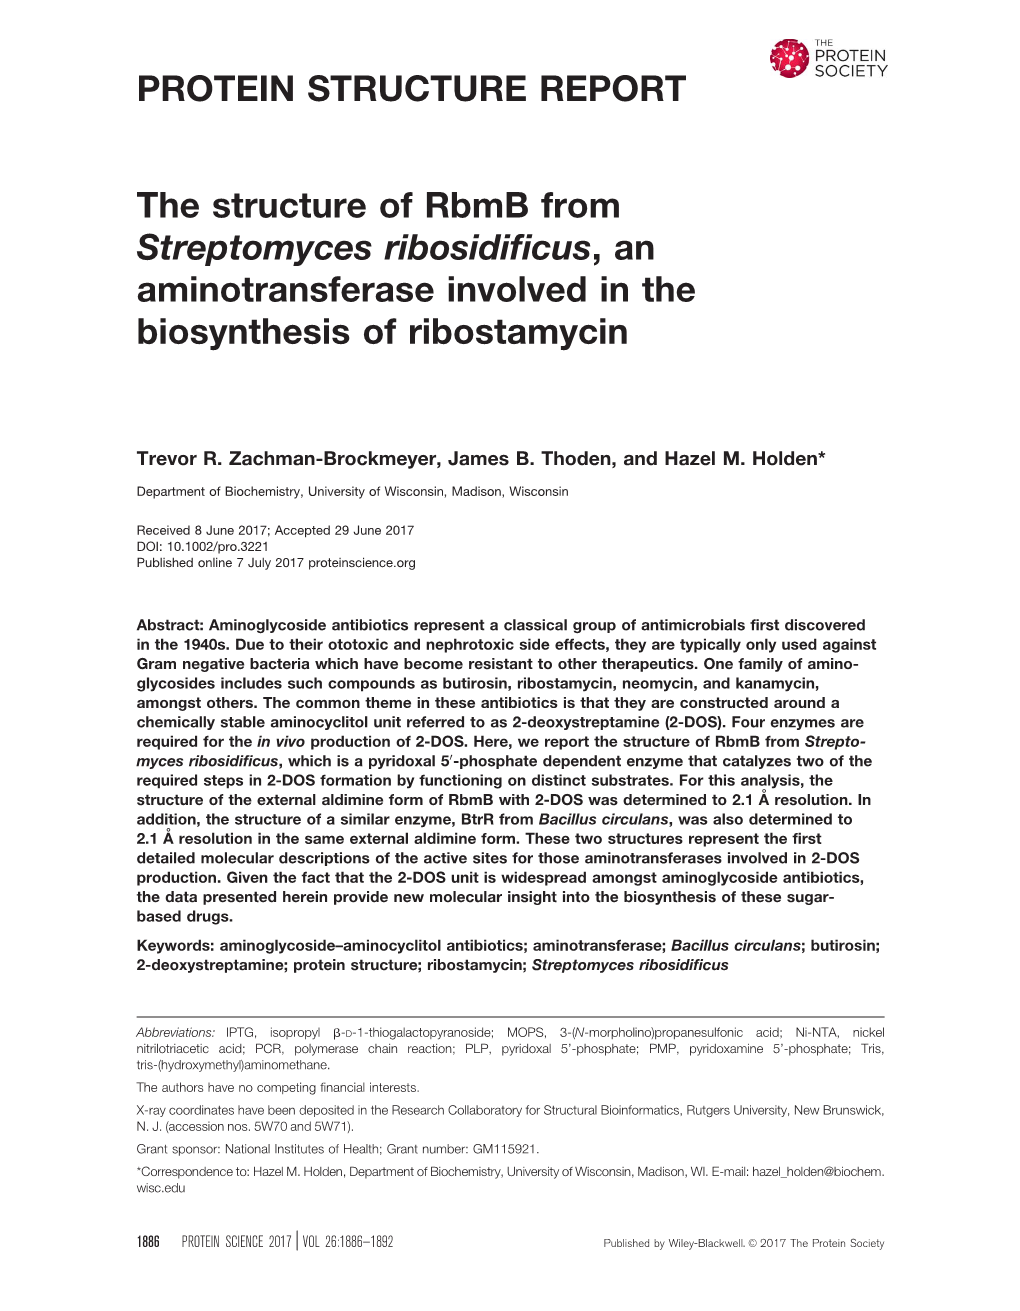 The Structure of Rbmb from Streptomyces Ribosidificus, An